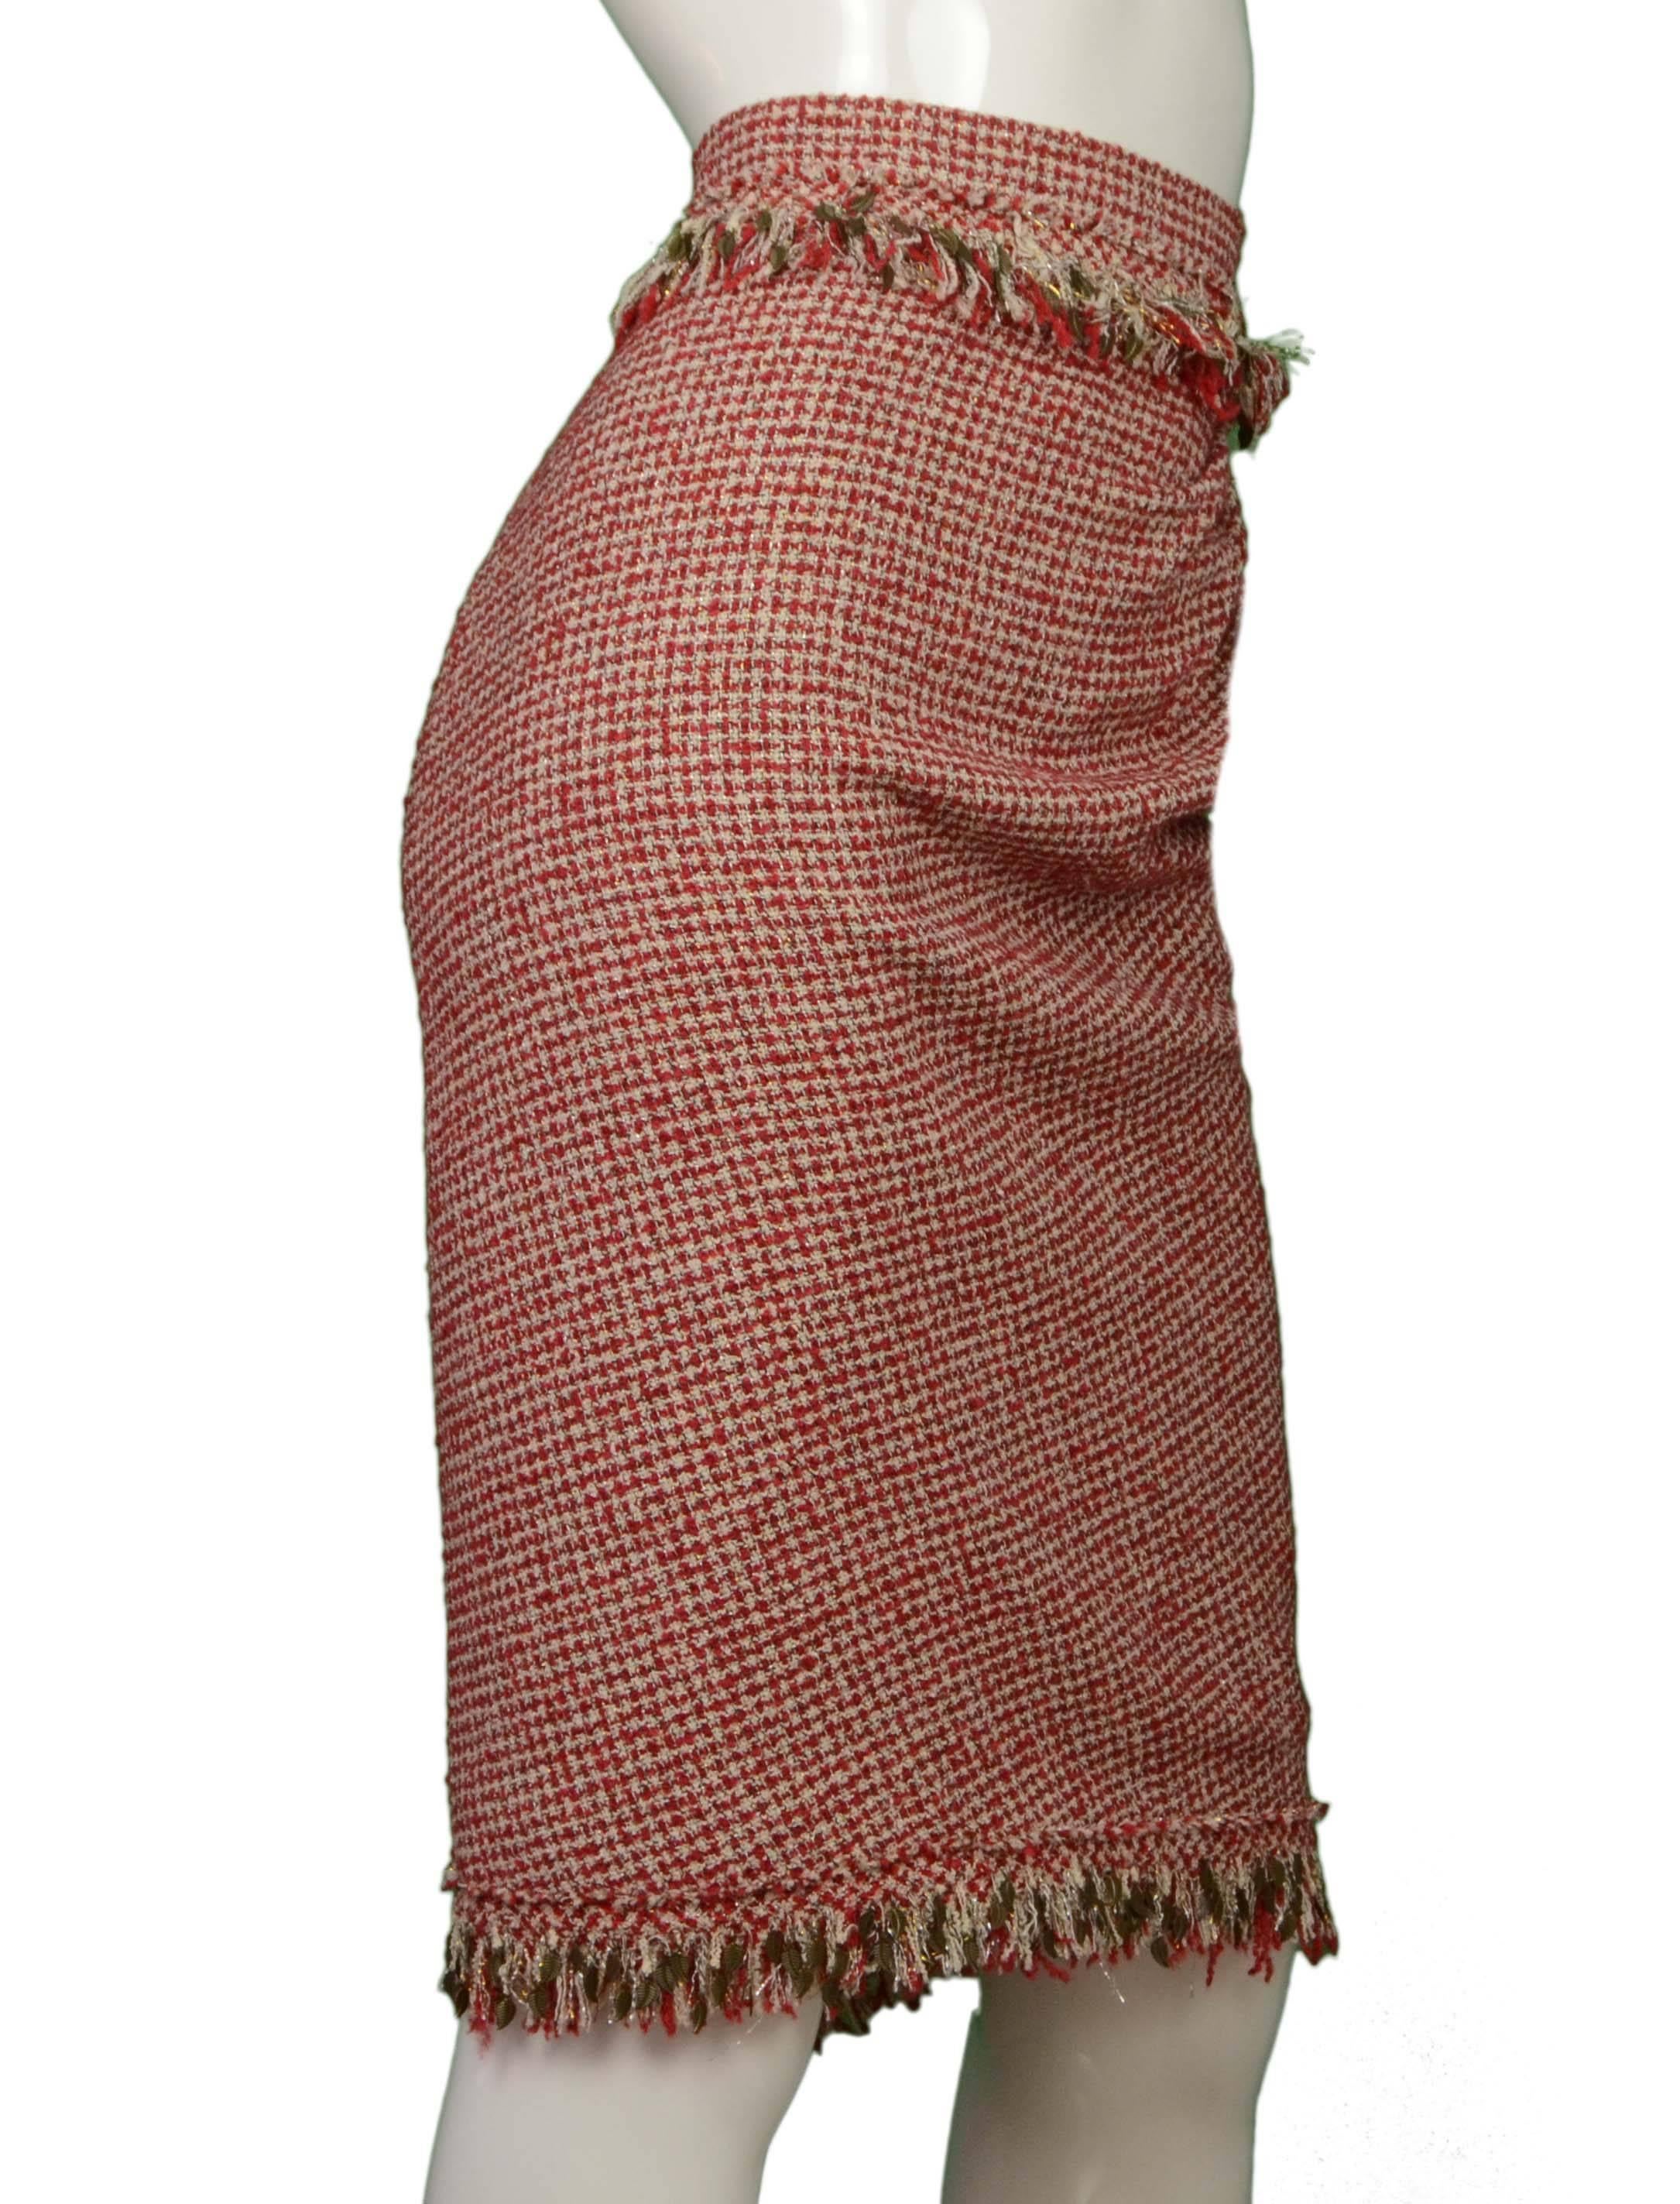 Chanel Red & White Tweed Skirt 
Features bronze metal leaf details throughout trim
Made In: France
Color: Red and white
Composition: 49% wool, 28% rayon, 10% nylon, 8% silk, 3% polyester, 2% metal
Lining: Taupe, 100% silk
Closure/Opening: Back